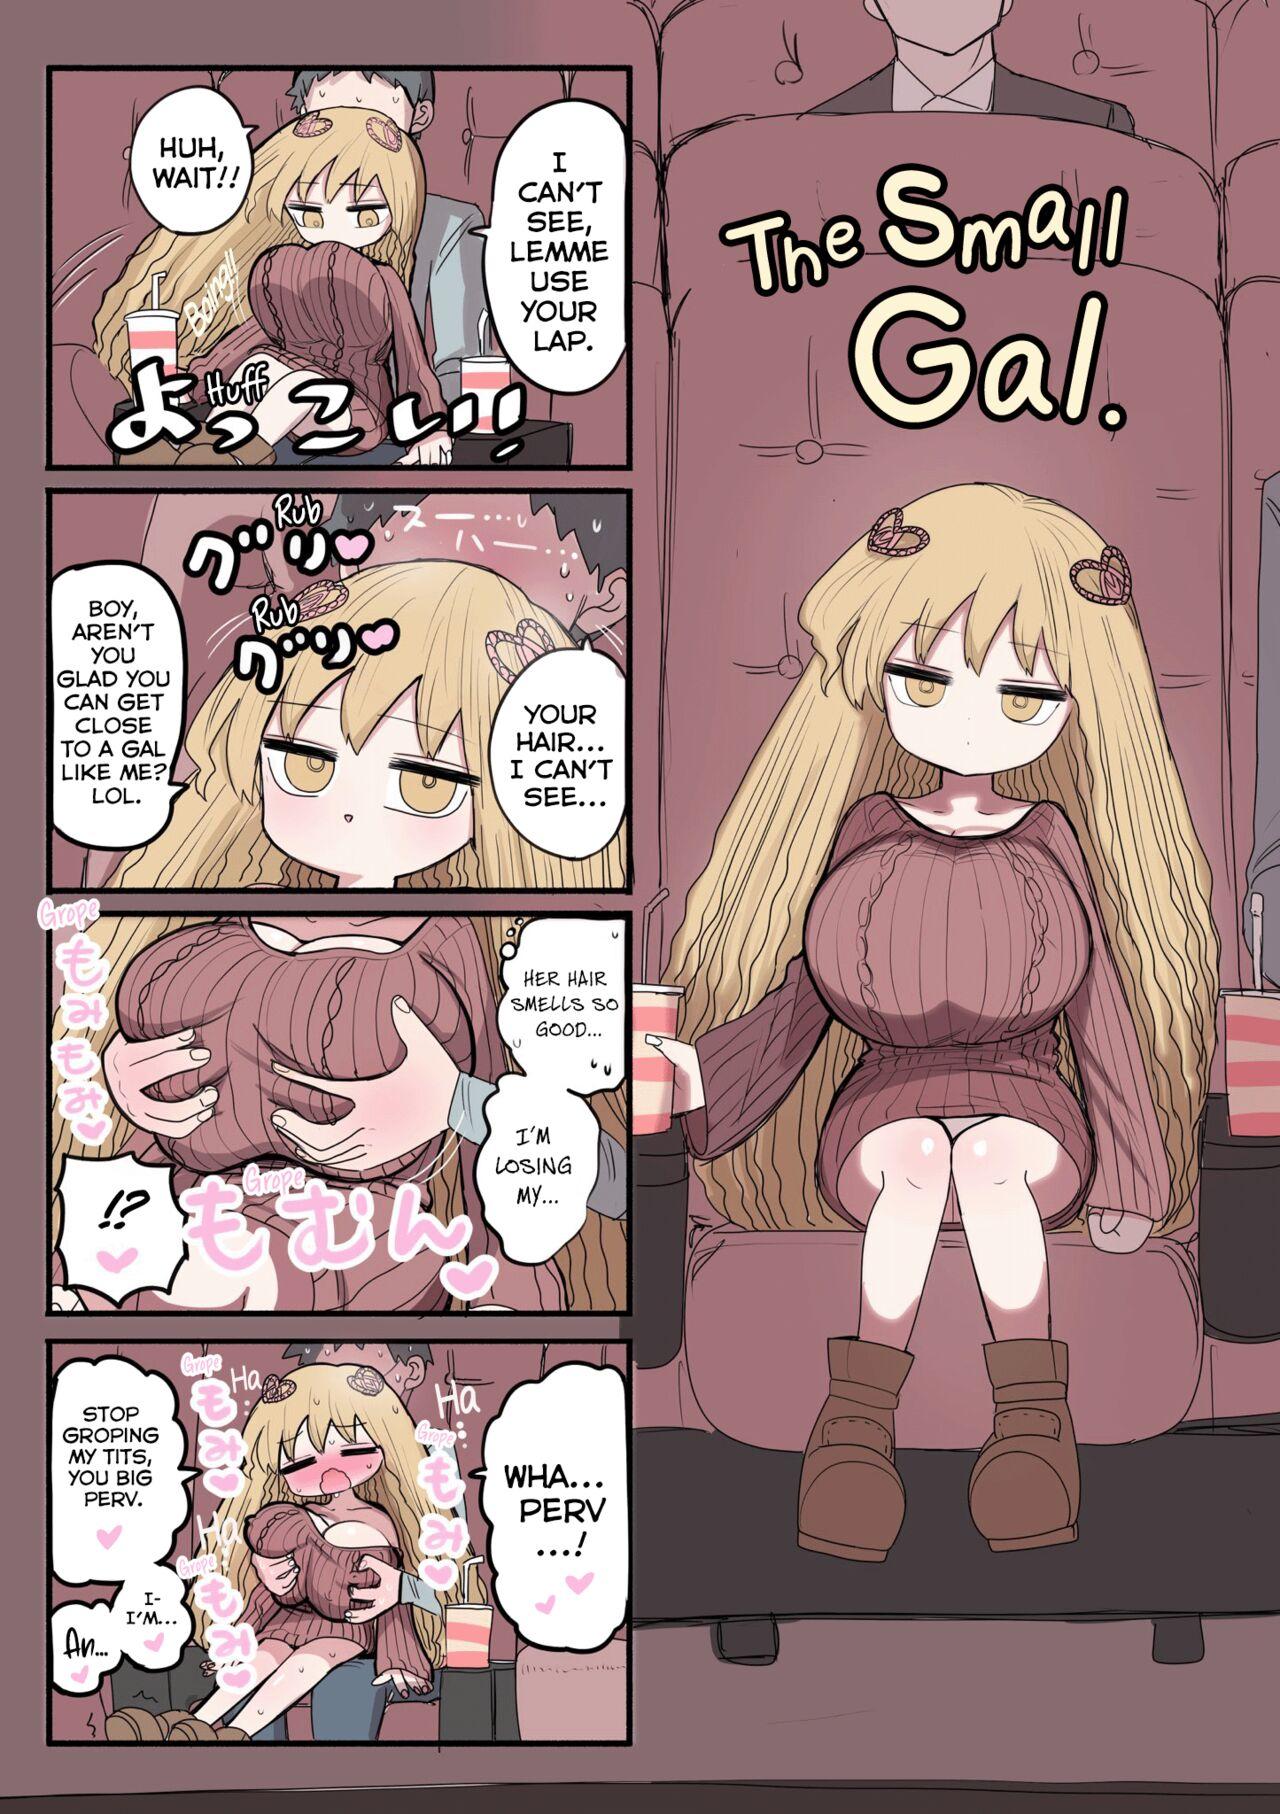 Chiisai Gal | The Small Gal 12